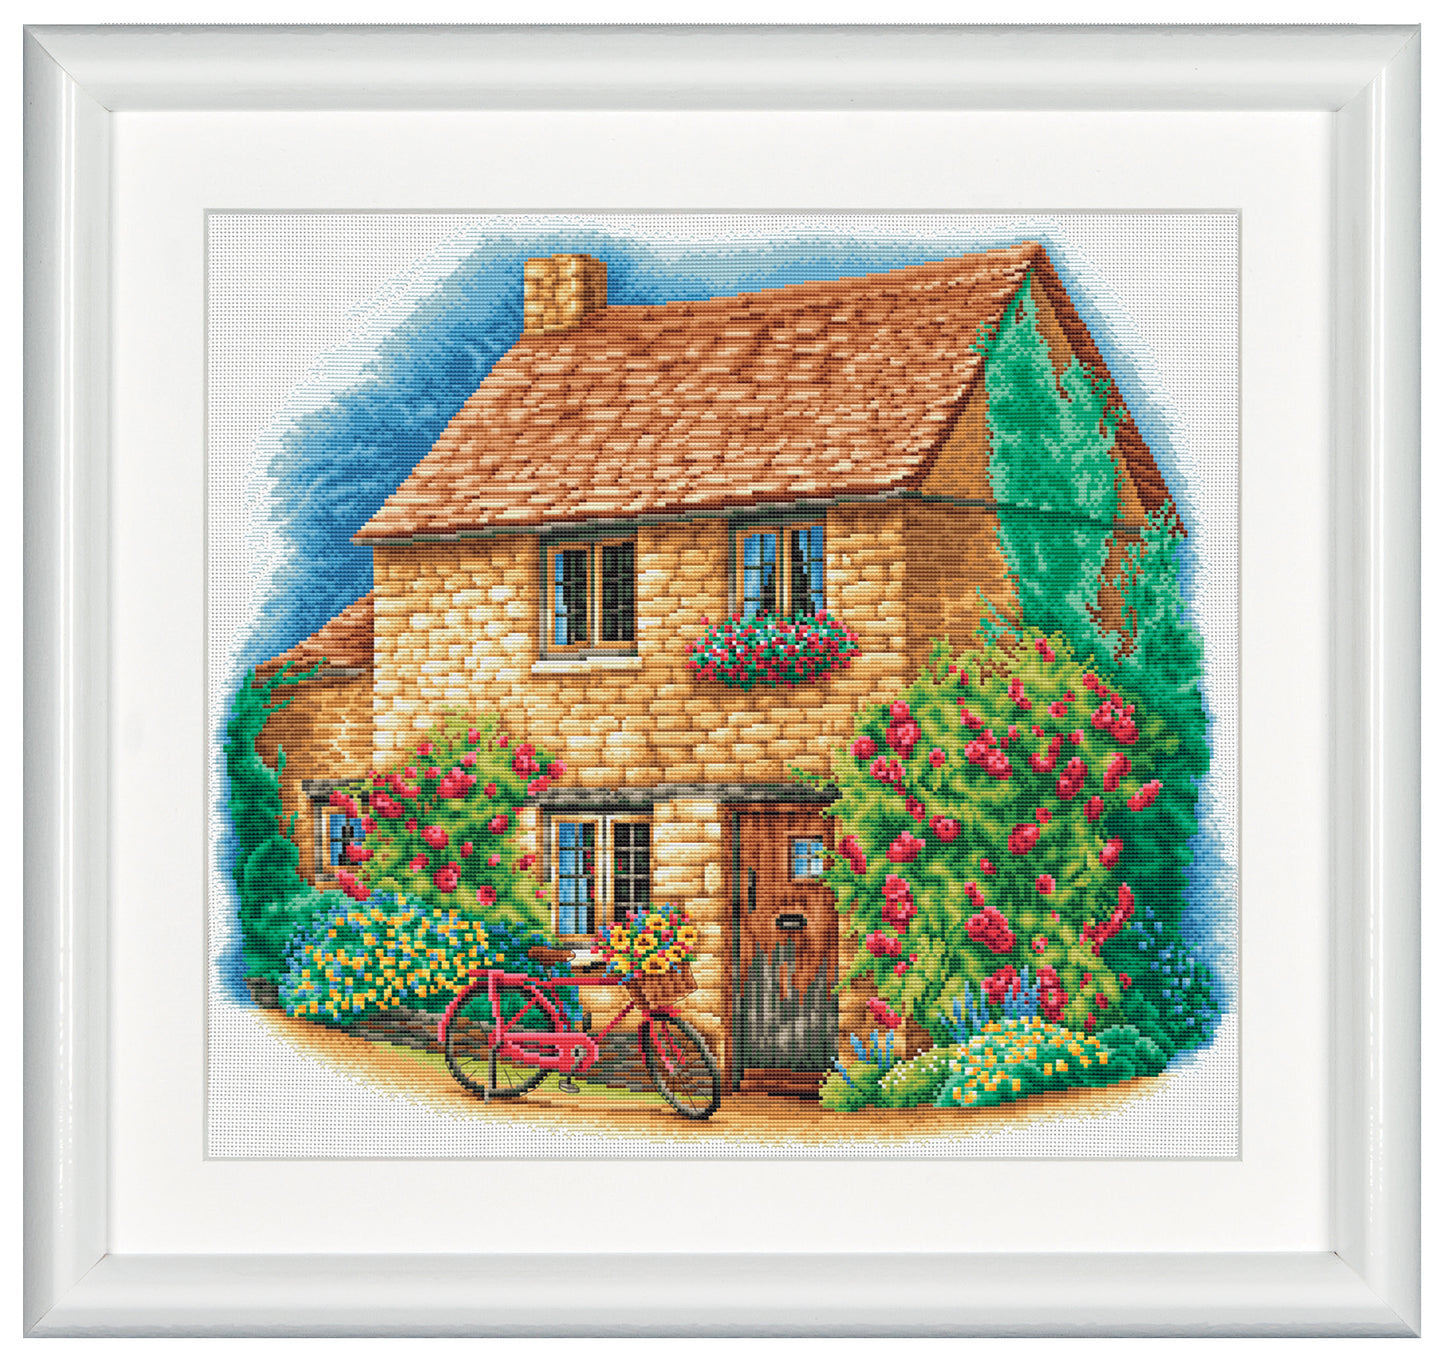 The cross stitch-kit features a cute cottage house, perfect to add a country-style touch in modern abodes. The rustic brown color of the bricks, surrounded by charming floral colors and the bright red bike give an appealing contrast. DSB cross stitch kits have easy to follow design charts and contain all items needed to facilitate embroidery without hassle. To cater to both beginners as well as advanced stitching artists.